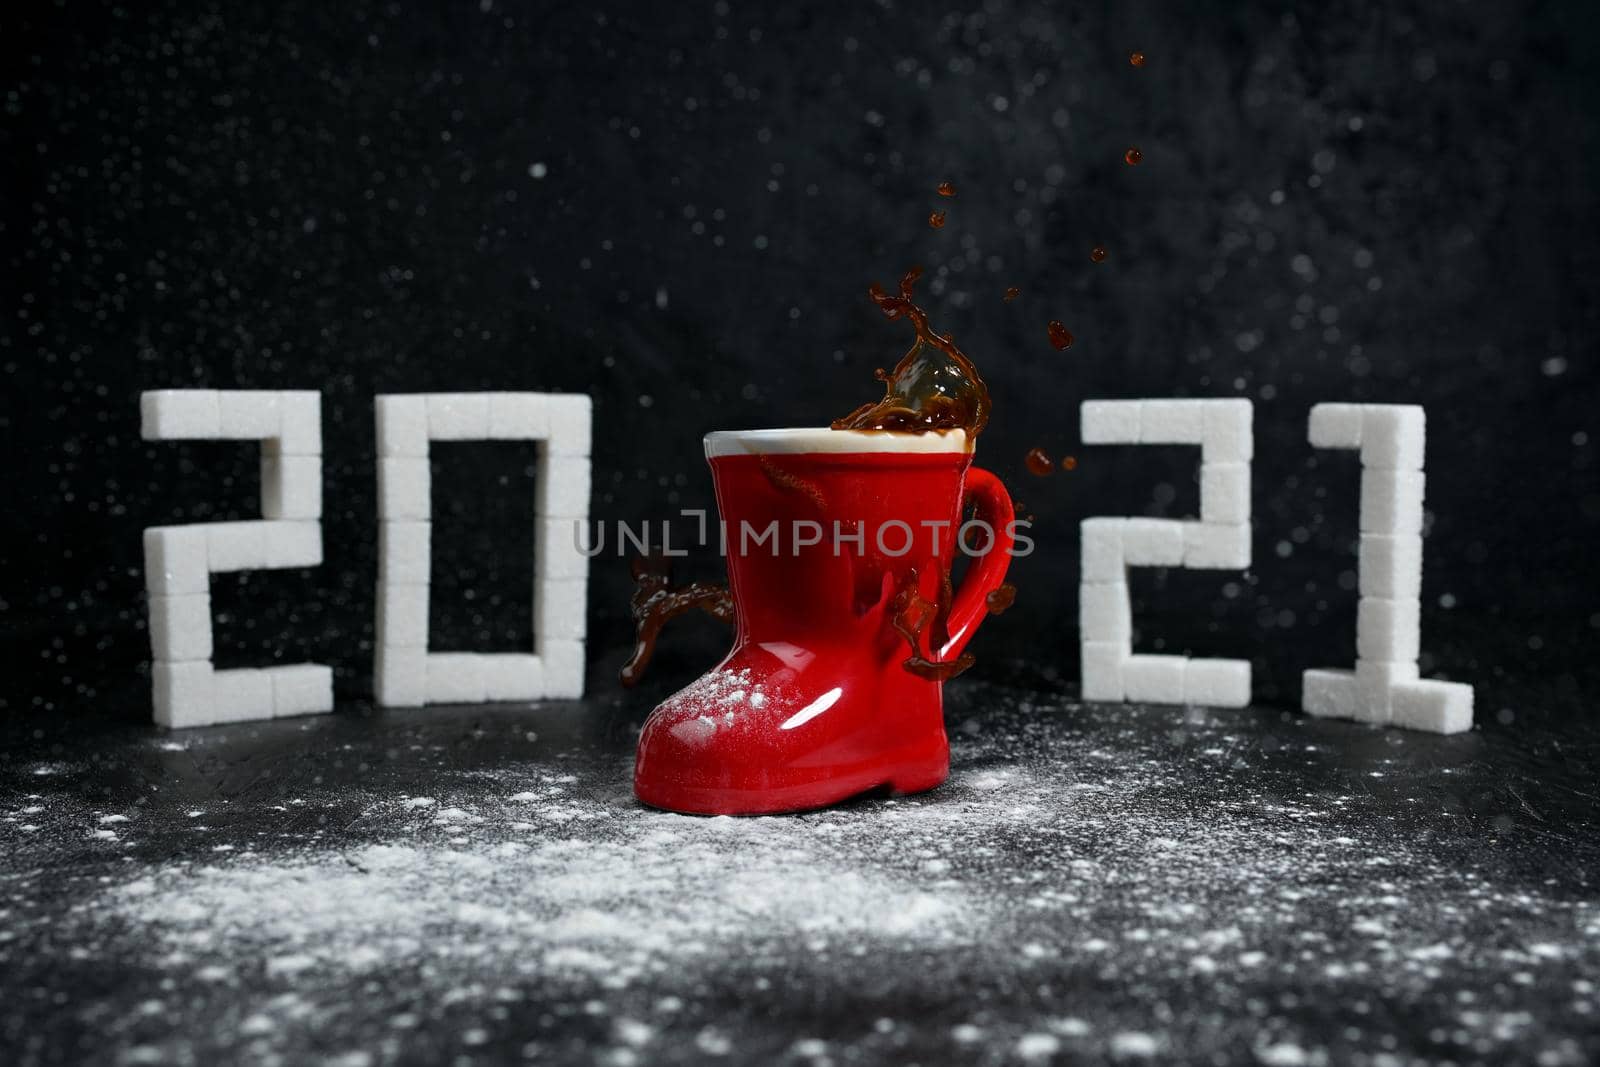 New Year 2021. Coffee splashes and snow in the coming 2021. Figures from sugar by sashokddt